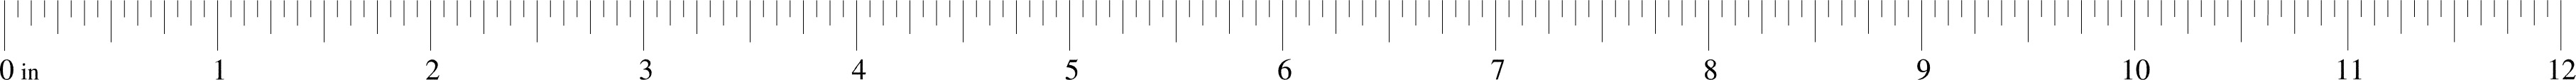 Online Foot Ruler Actual Size Image